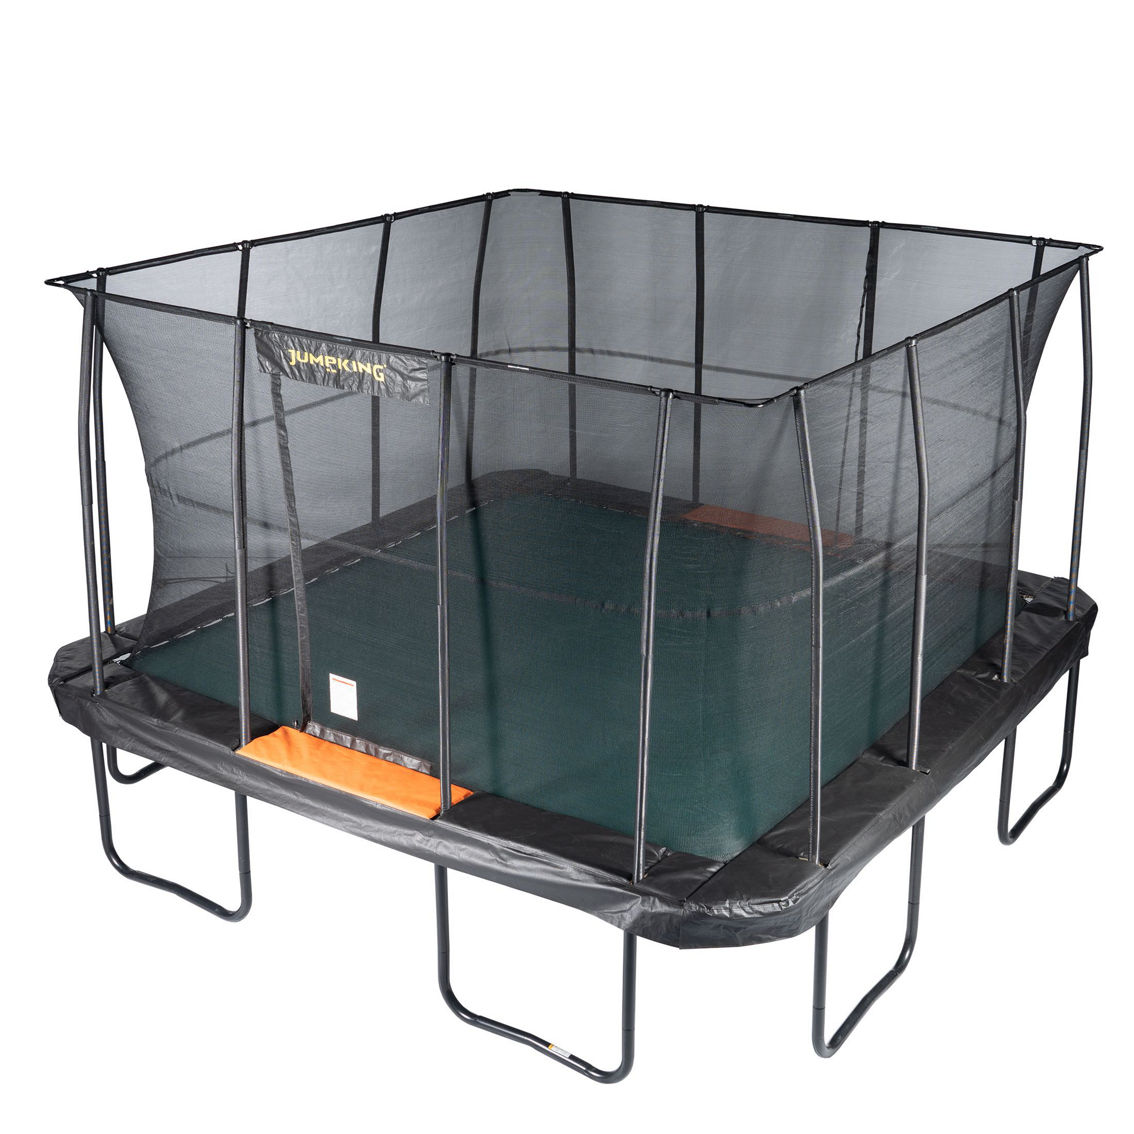 JumpKing 13' x 13' Square Trampoline - Image 2 of 5